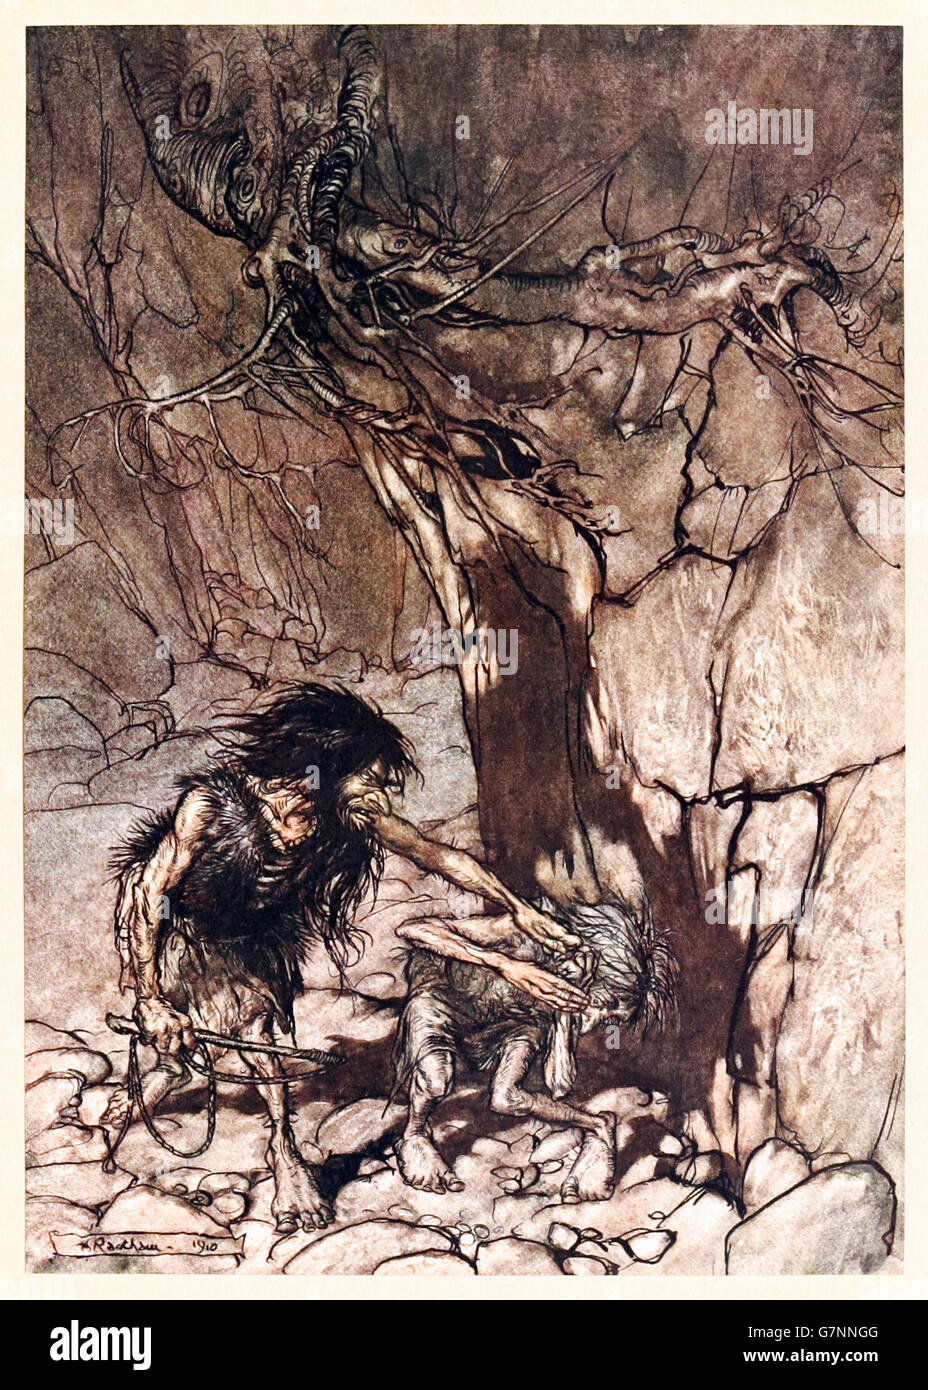 “Mime, howling. “Ohe! Ohe! Oh! Oh!”” from ‘The Rhinegold & the Valkyrie’ illustrated by Arthur Rackham (1867-1939), published in 1910. Alberich enslaved the rest of the Nibelung dwarves with the power of the ring and forces his brother Mime to create a magic helmet, the Tarnhelm. Stock Photo